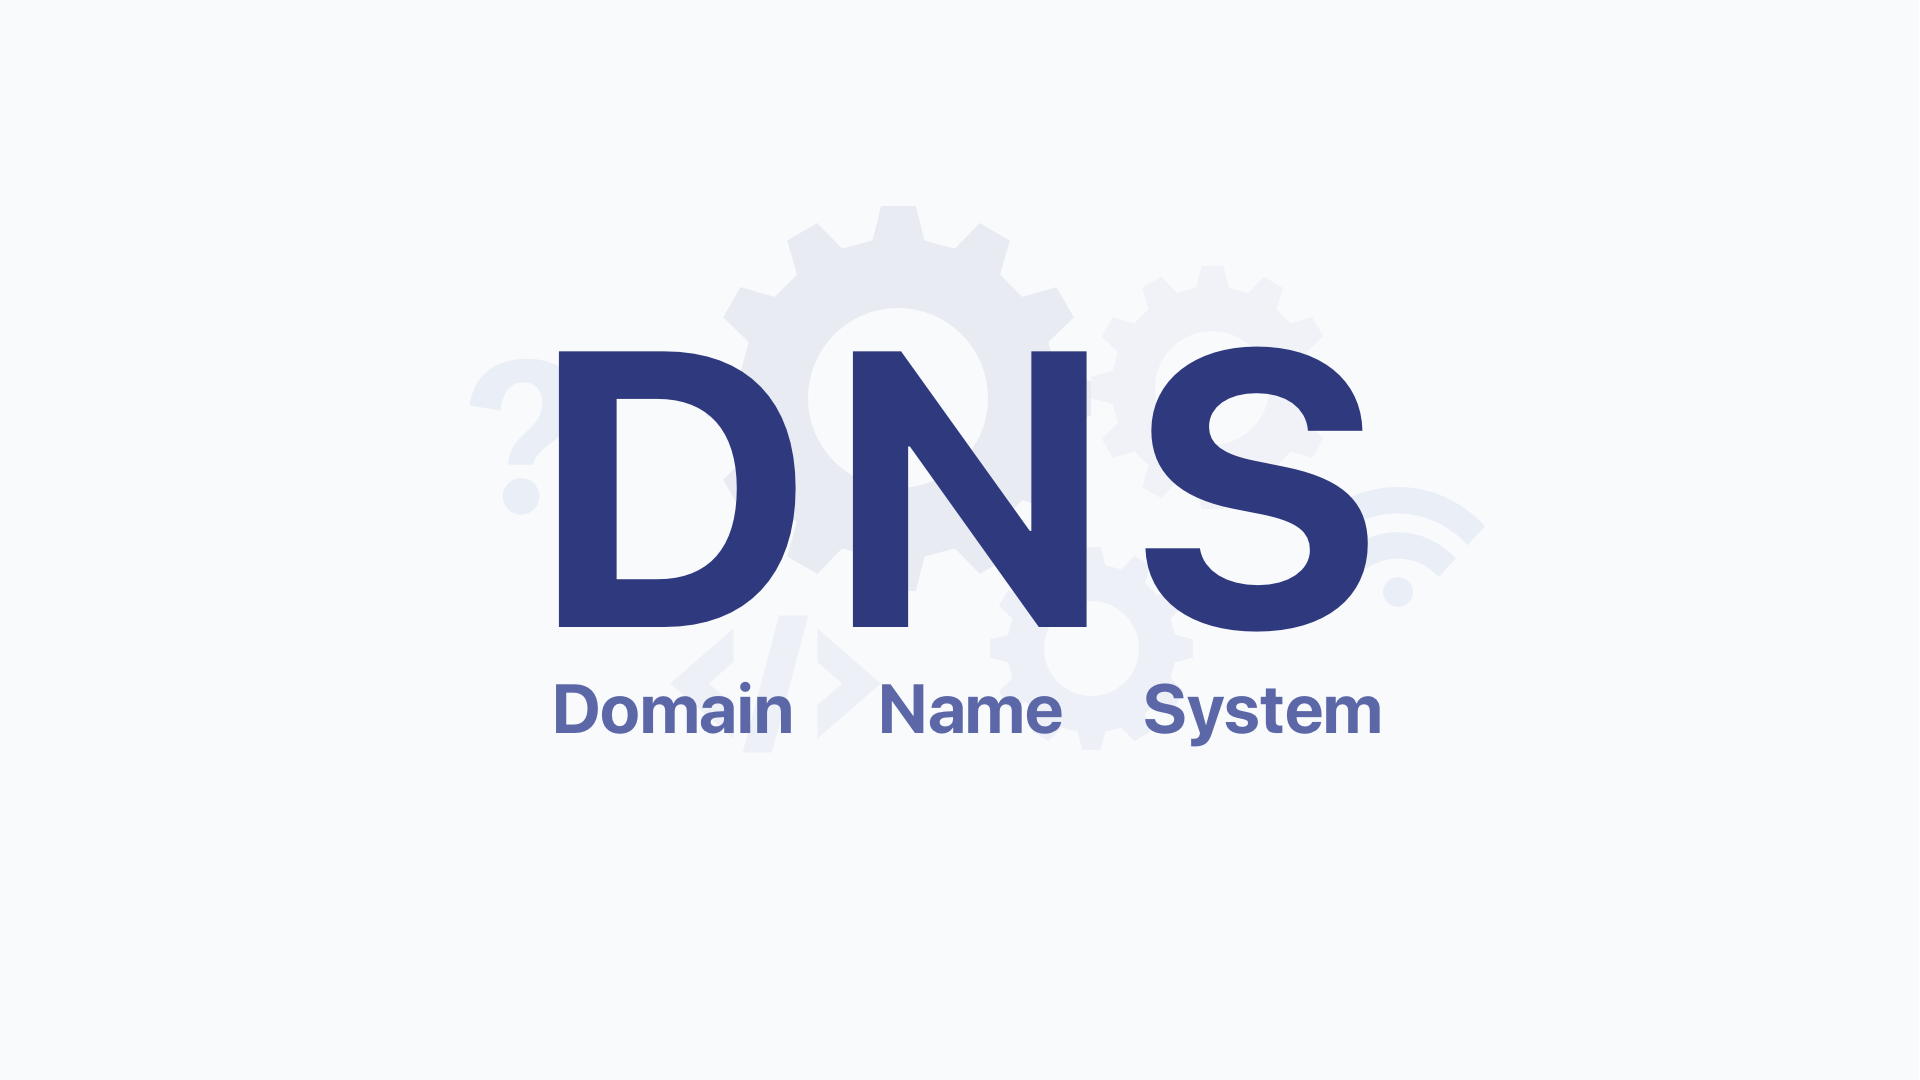 What is DNS and how does it work